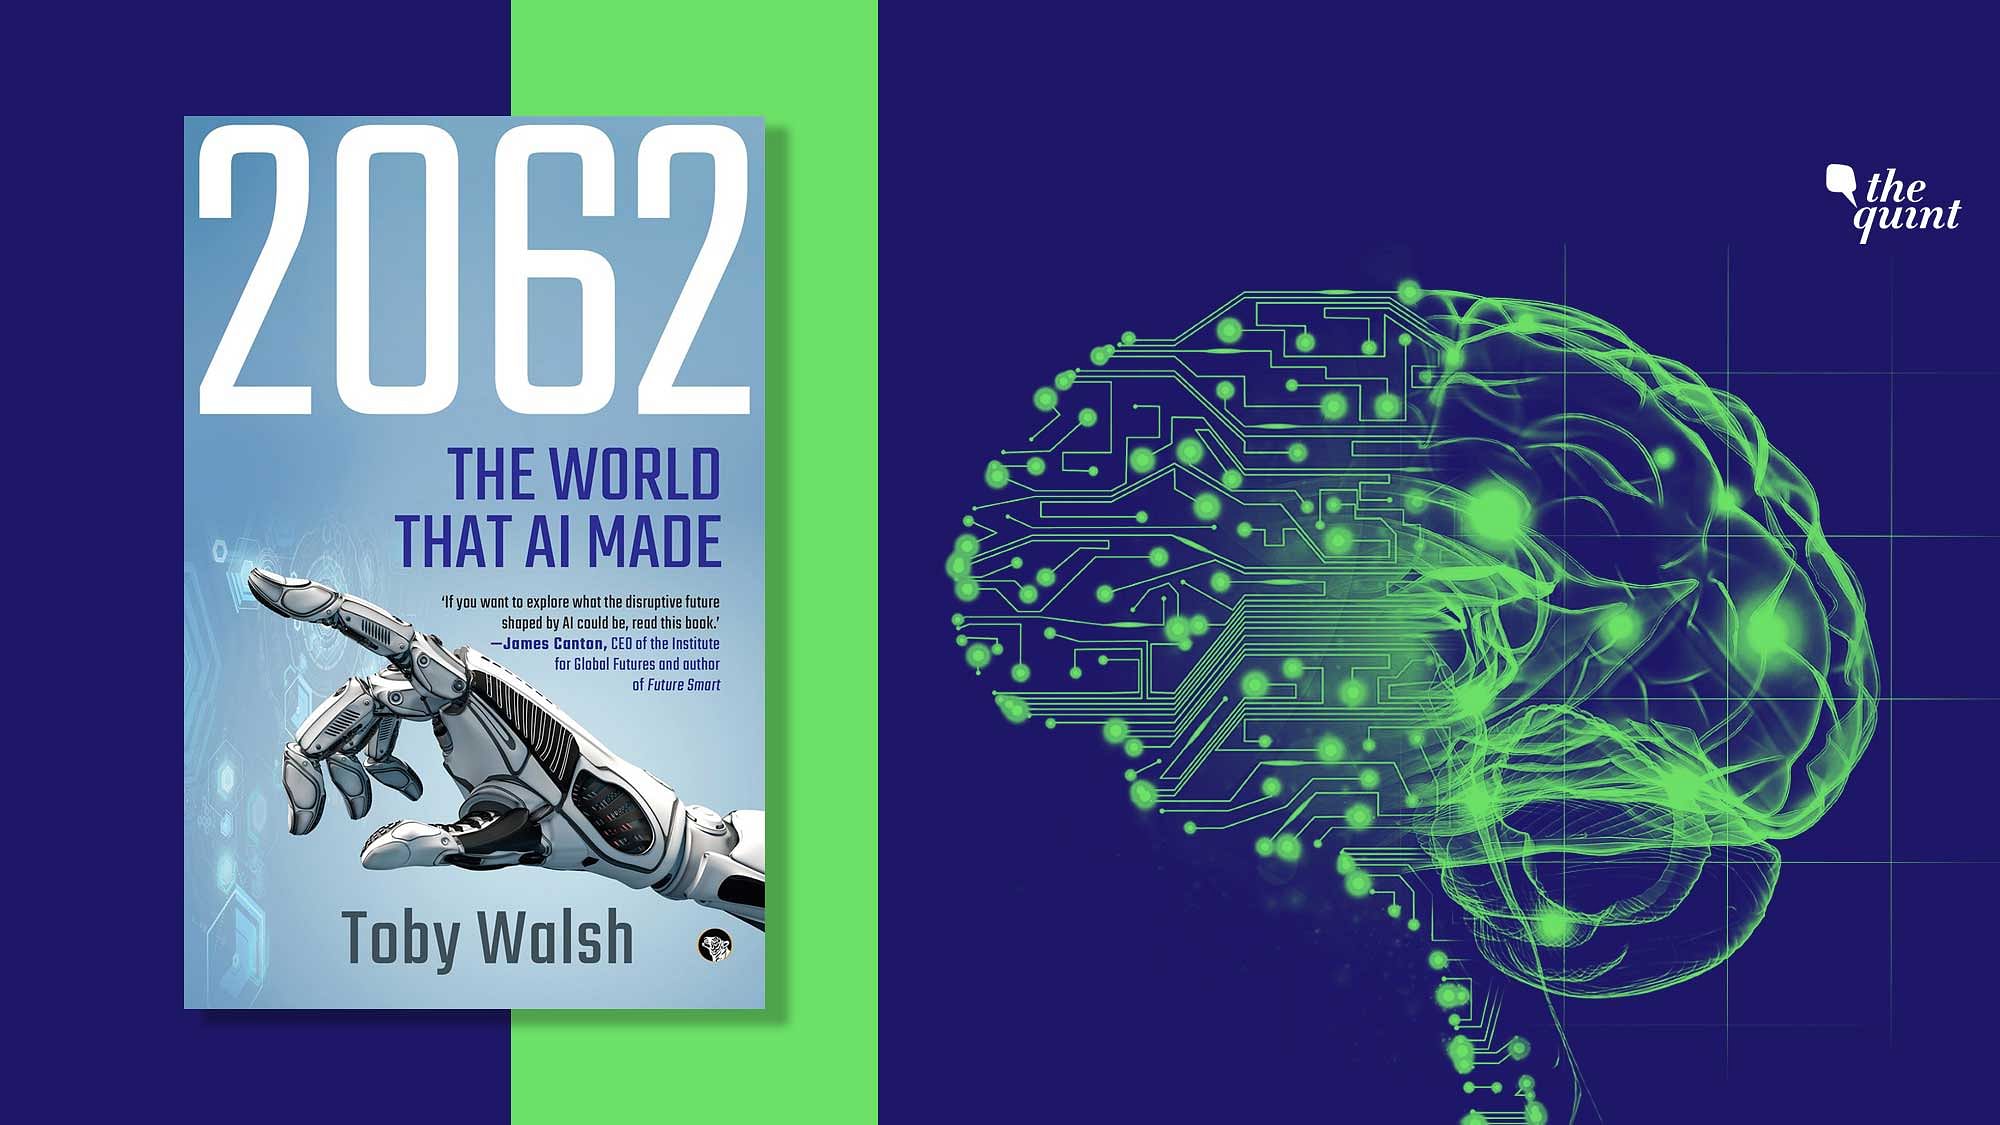 In this excerpt from <i>2062: The World that AI Made</i> by Toby Walsh the author explores the complex and fascinating question of whether machines can one day develop consciousness like human beings.